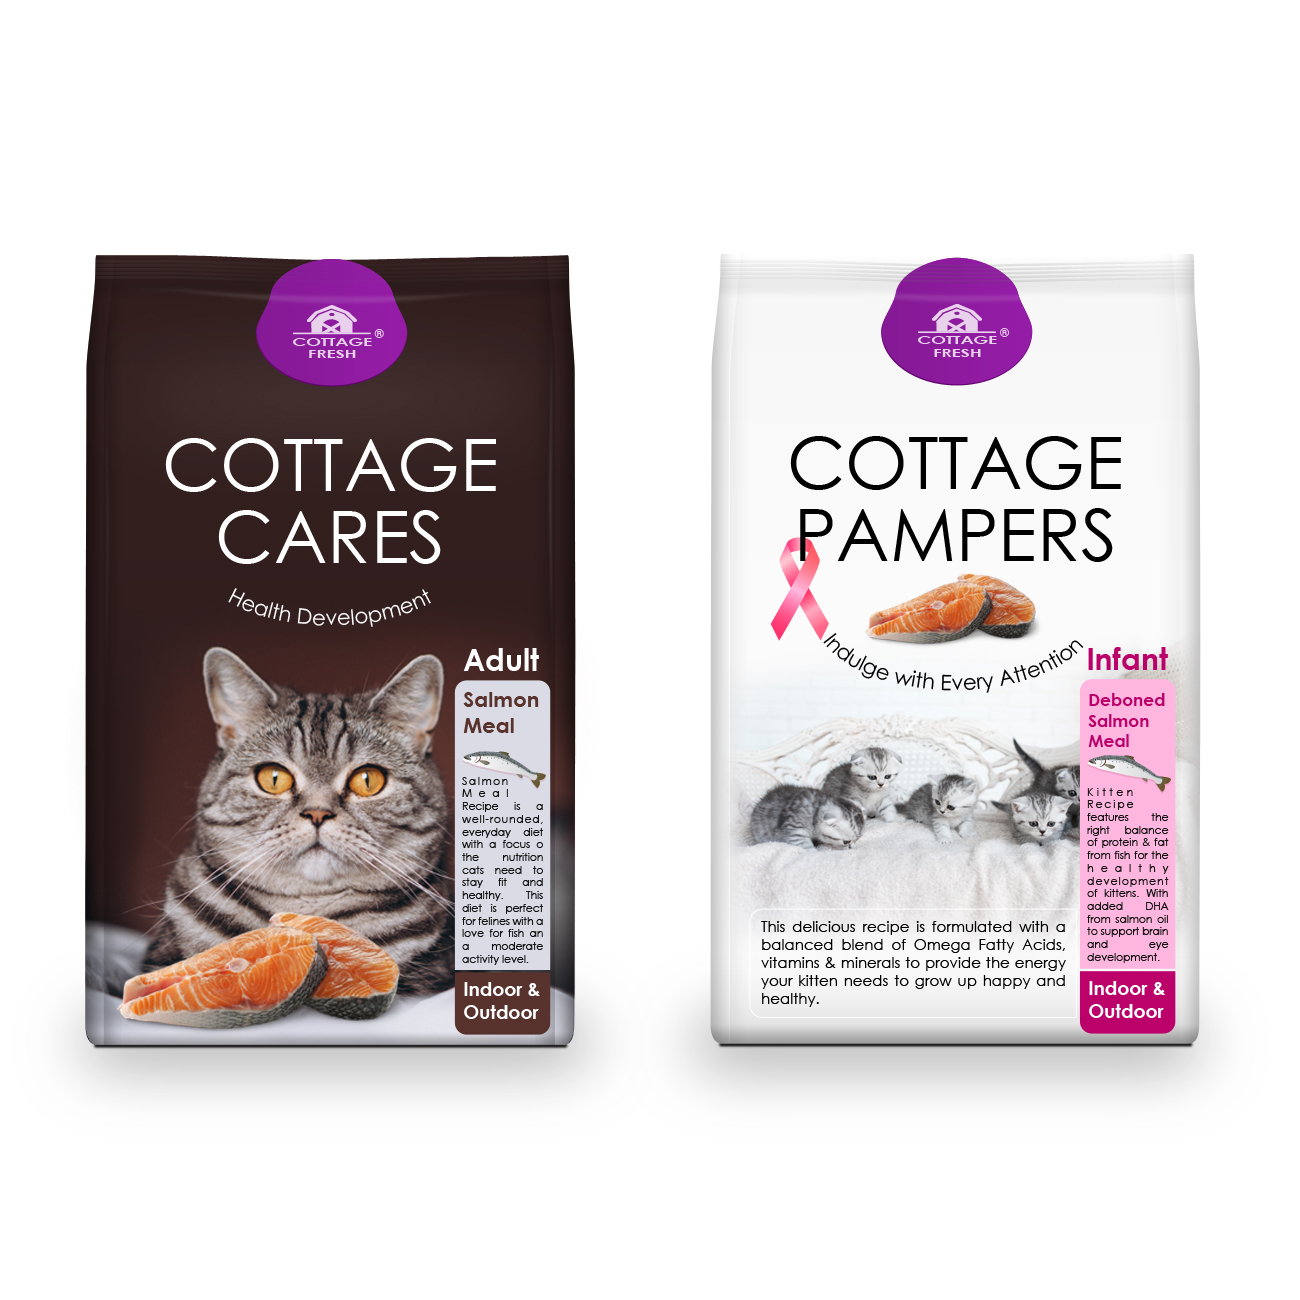 unique packaging design for pets and animals products